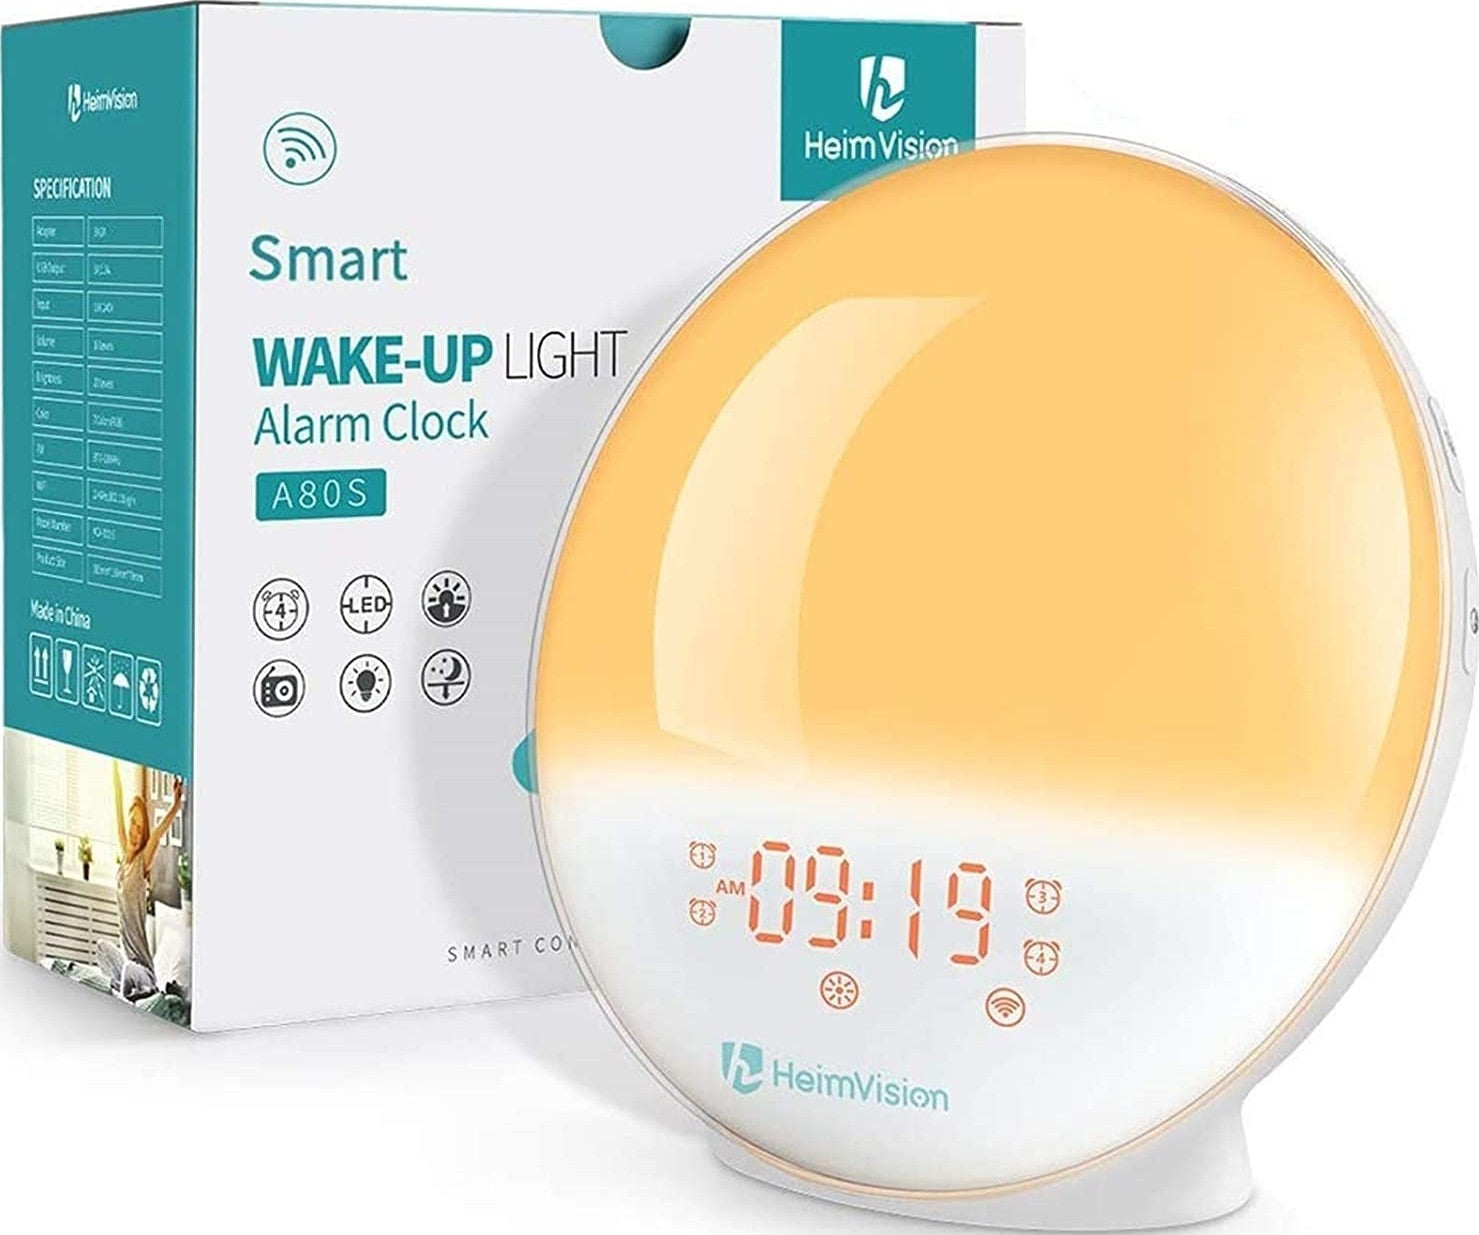 HeimVision Sunrise Alarm Clock, A80S Smart Wake up Light Work with Alexa, Sleep Aid Digital Alarm Clock with Sunset Simulation, Snooze/FM Radio /7 Natural Sounds and 4 Alarms for Adults & Kids White/Orange 165x60millimeter